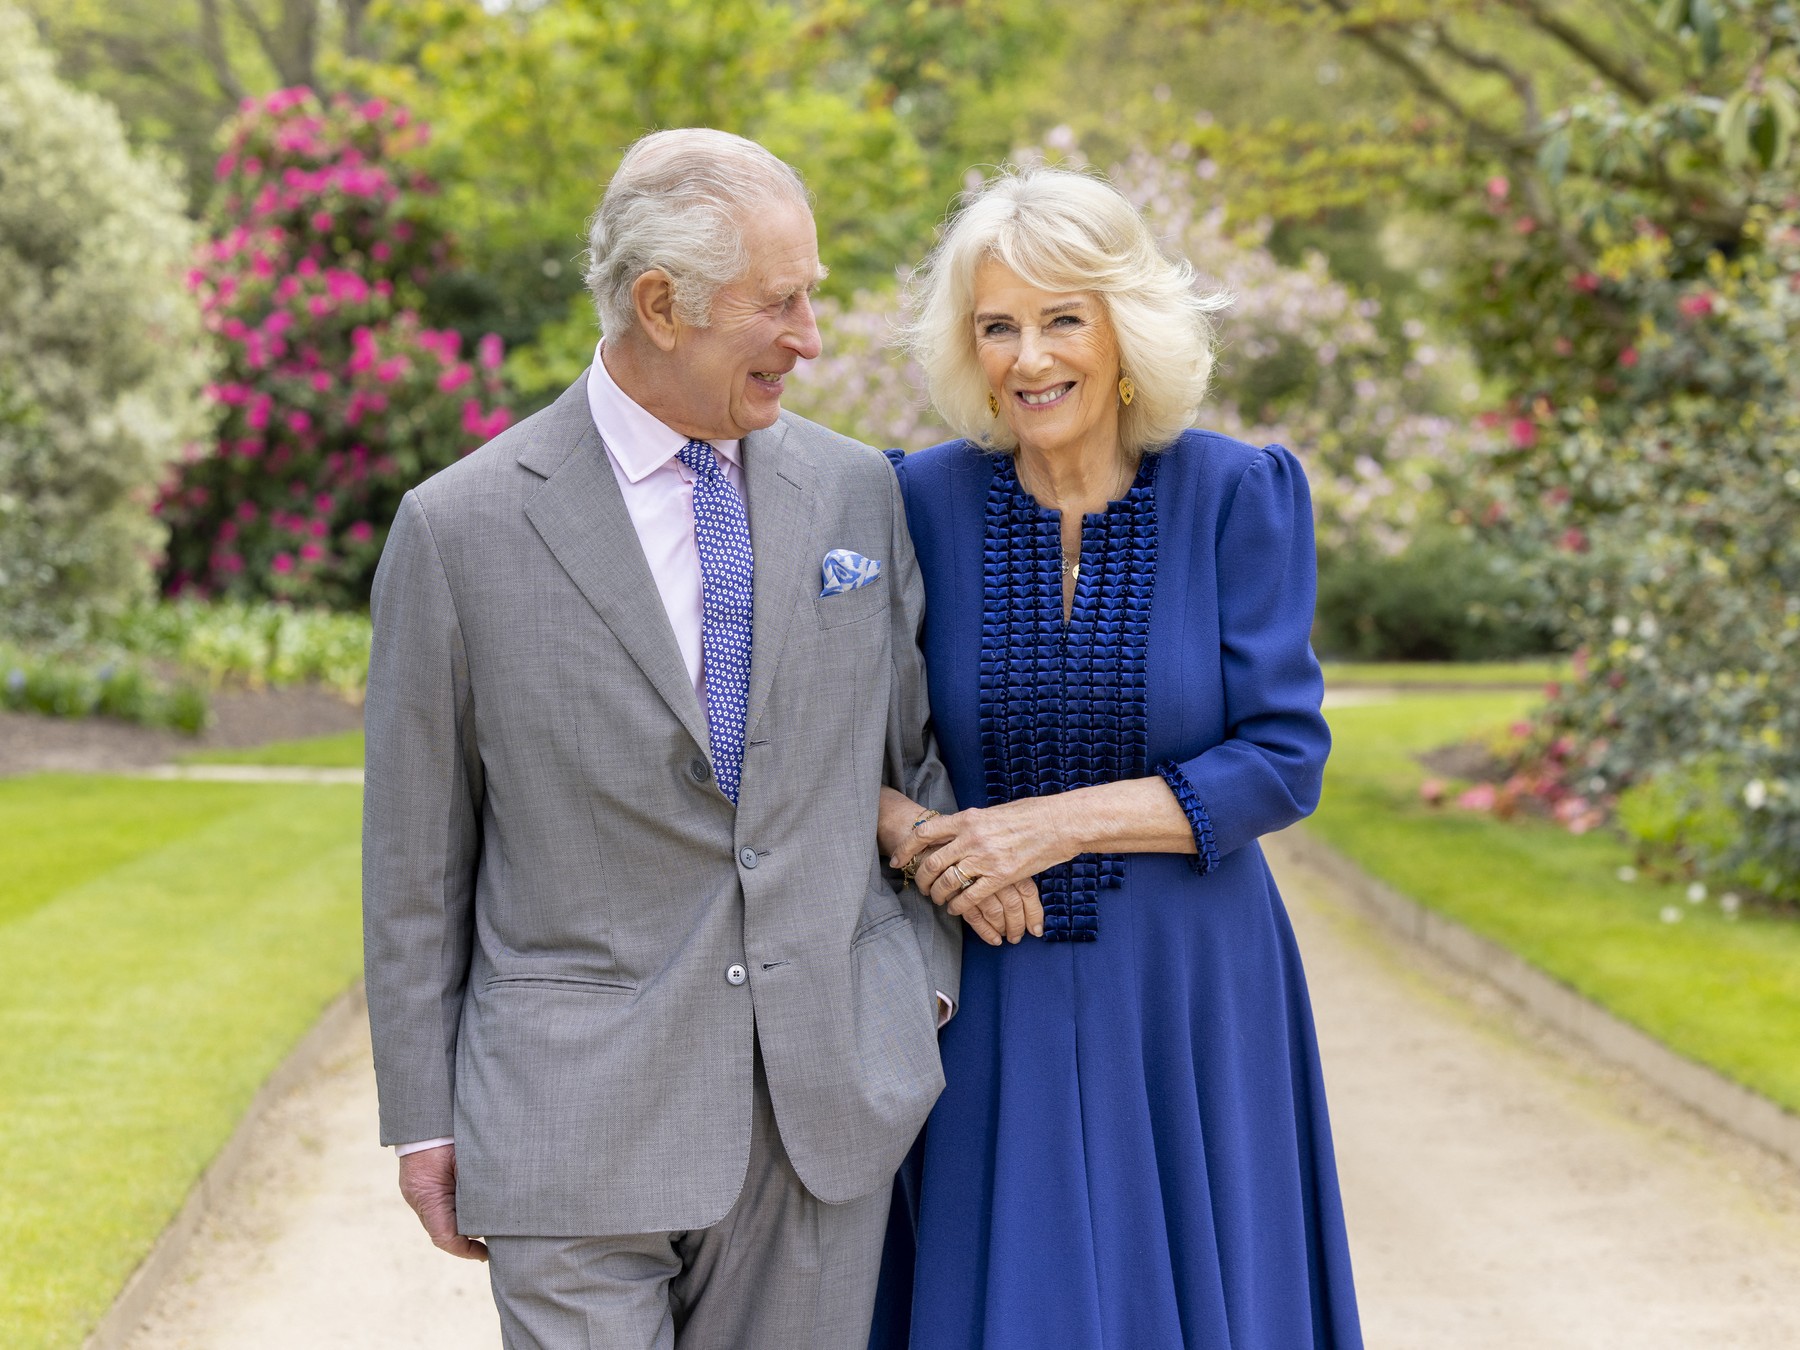 A handout photo issued by the Royal Household on April 26, 2024 shows Britain's King Charles III and Queen Camilla in the garden of Buckingham Palace in London, on April 10. British head of state King Charles III will make a limited return to public duties next week, after doctors said they were "very encouraged" by the progress of his treatment for cancer. The image, taken the day after their 19th wedding anniversary, was release to mark the first Coronation of the King.,Image: 868166480, License: Rights-managed, Restrictions: RESTRICTED TO EDITORIAL USE - MANDATORY CREDIT "AFP PHOTO / BUCKINGHAM PALACE / Millie Pilkington " - NO MARKETING NO ADVERTISING CAMPAIGNS - DISTRIBUTED AS A SERVICE TO CLIENTS - NO SALES - NO COMMERCIAL USE INCLUDING ANY USE IN MERCHANDISING, ADVERTISING OR ANY OTHER NON-EDITORIAL USE - THIS IMAGE MUST NOT BE DIGITALLY ENHANCED, CROPPED, MANIPULATED OR MODIFIED IN ANY MANNER OR FORM. THIS PHOTO MAY SOLELY BE USED FOR EDITORIAL REPORTING PURPOSES FOR THE CONTEMPORANEOUS ILLUSTRATION OF EVENTS, THINGS OR THE PEOPLE IN THE IMAGE OR FACTS MENTIONED IN THE CAPTION. REUSE OF THE PICTURE MAY REQUIRE FURTHER PERMISSION FROM THE COPYRIGHT HOLDER. NO USE AFTER MAY 24, 2024., ***
HANDOUT image or SOCIAL MEDIA IMAGE or FILMSTILL for EDITORIAL USE ONLY! * Please note: Fees charged by Profimedia are for the Profimedia's services only, and do not, nor are they intended to, convey to the user any ownership of Copyright or License in the material. Profimedia does not claim any ownership including but not limited to Copyright or License in the attached material. By publishing this material you (the user) expressly agree to indemnify and to hold Profimedia and its directors, shareholders and employees harmless from any loss, claims, damages, demands, expenses (including legal fees), or any causes of action or allegation against Profimedia arising out of or connected in any way with publication of the material. Profimedia does not claim any copyright or license in the attached materials. Any downloading fees charged by Profimedia are for Profimedia's services only. * Handling Fee Only 
***, Model Release: no, Credit line: Millie Pilkington / AFP / Profimedia